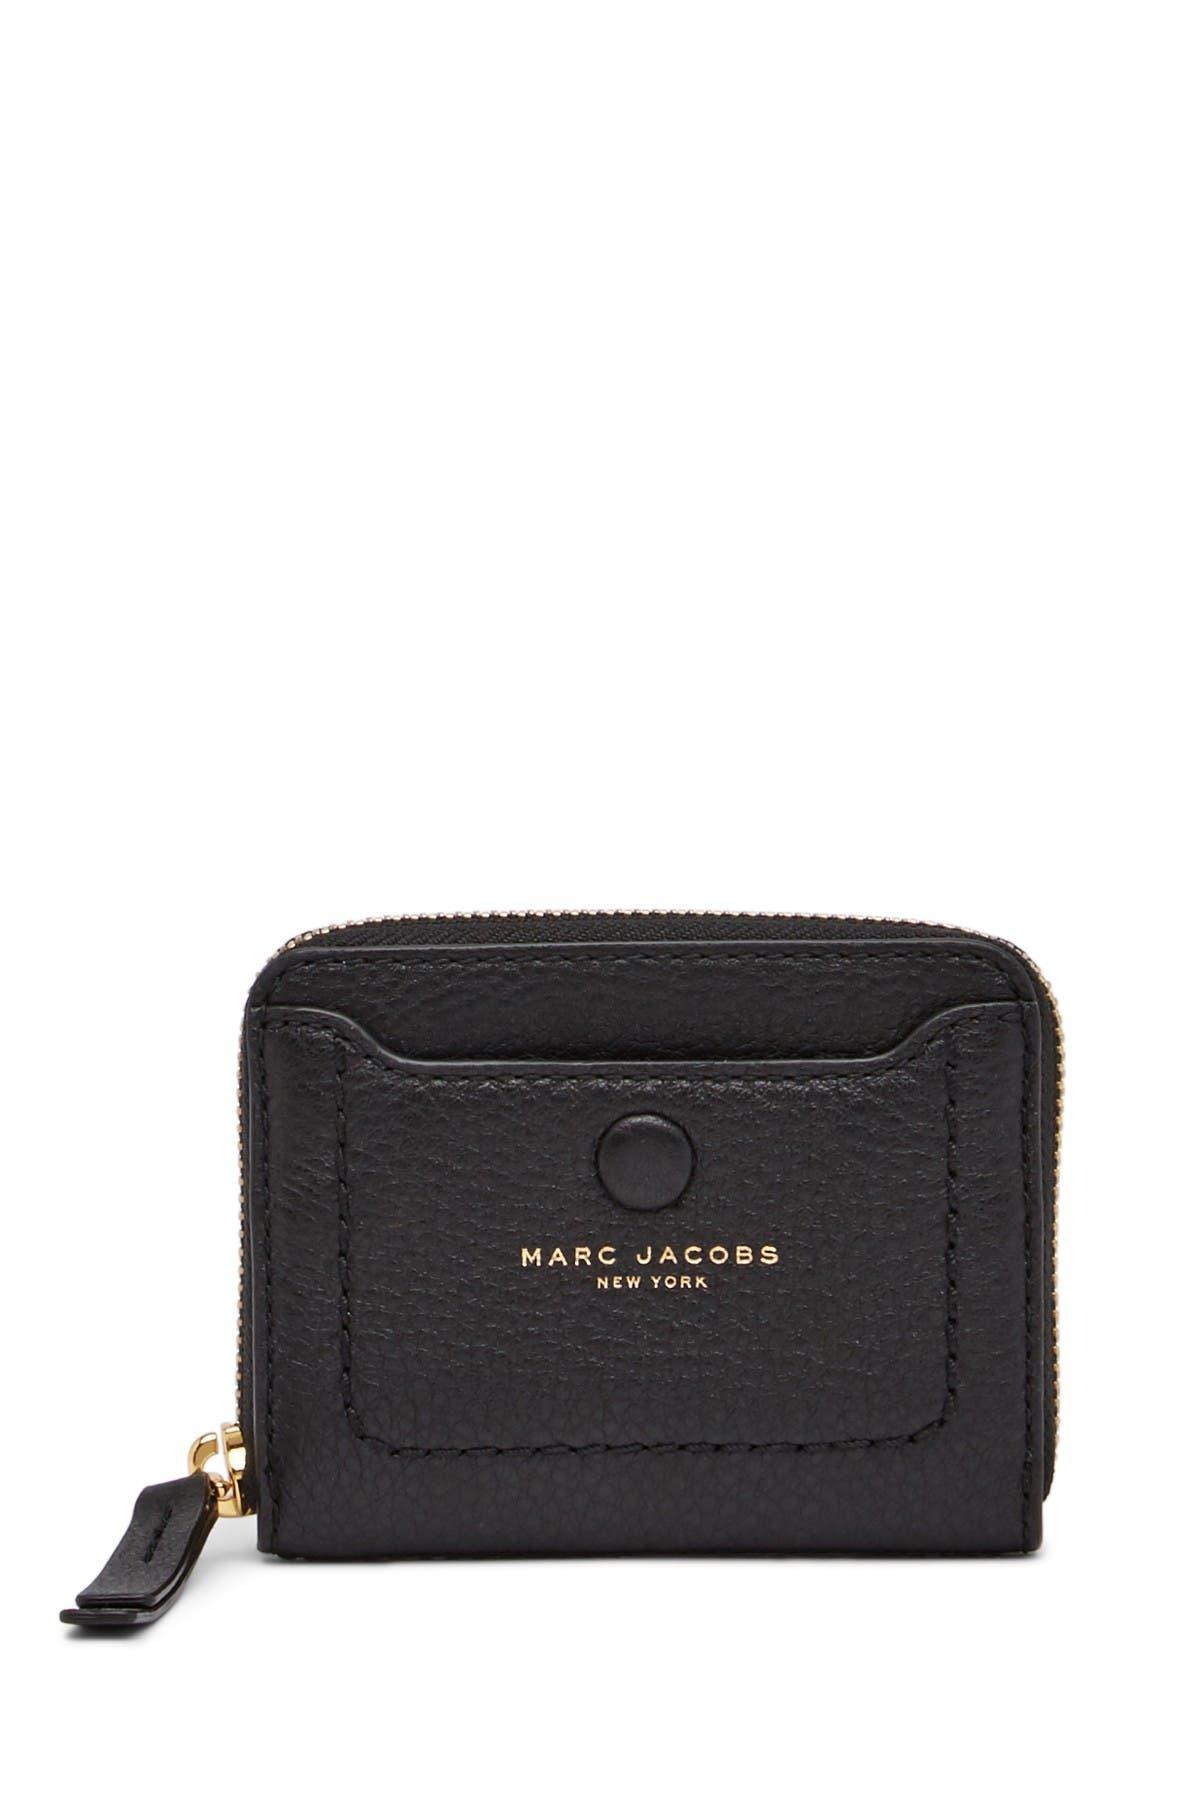 NWT MARC BY MARC JACOBS Black Leather Long Fold Zip Around Wallet